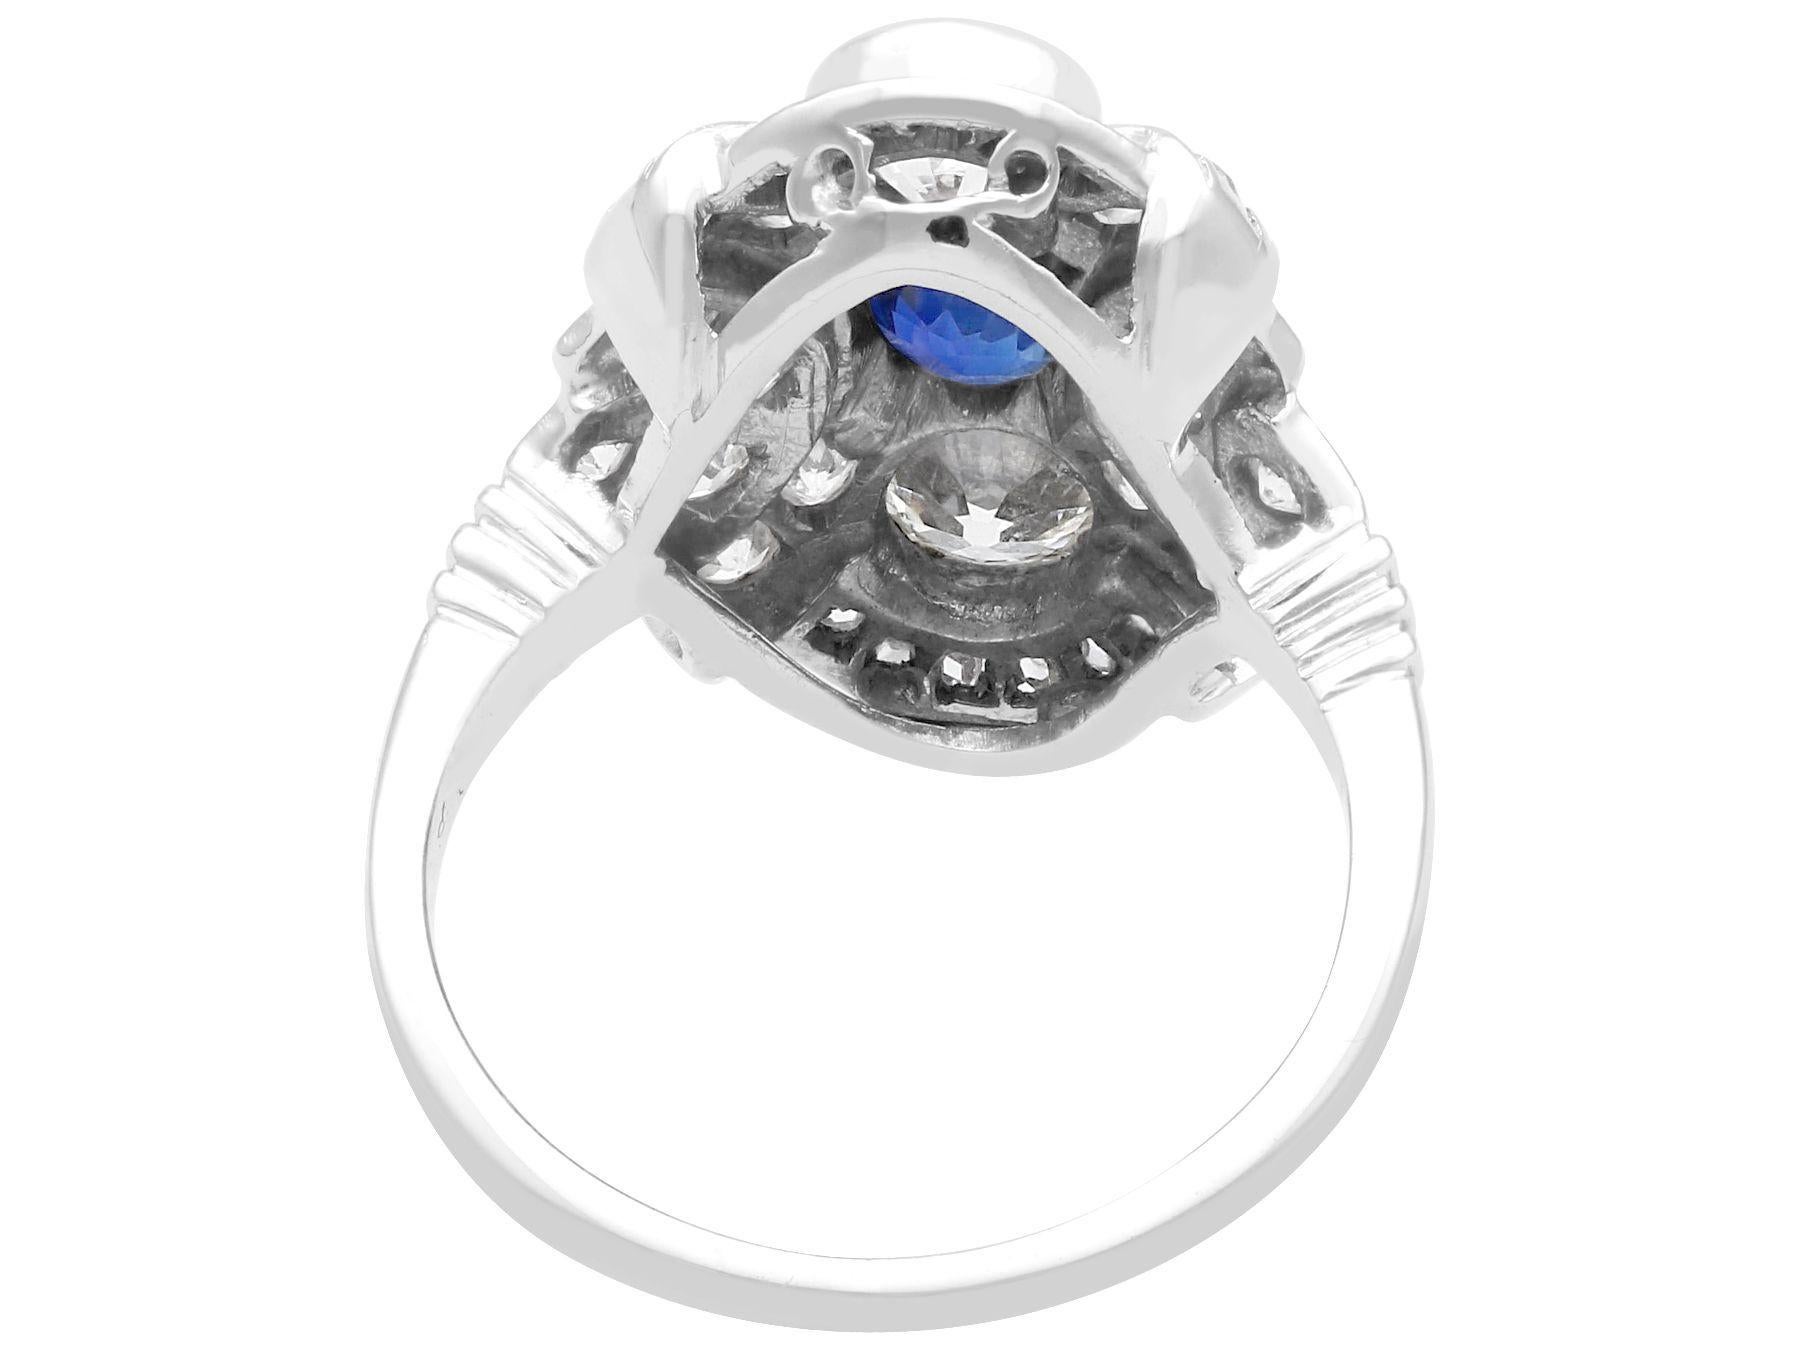 Antique Sapphire and 1.64 Carat Diamond White Gold Cocktail Ring, circa 1935 In Excellent Condition For Sale In Jesmond, Newcastle Upon Tyne